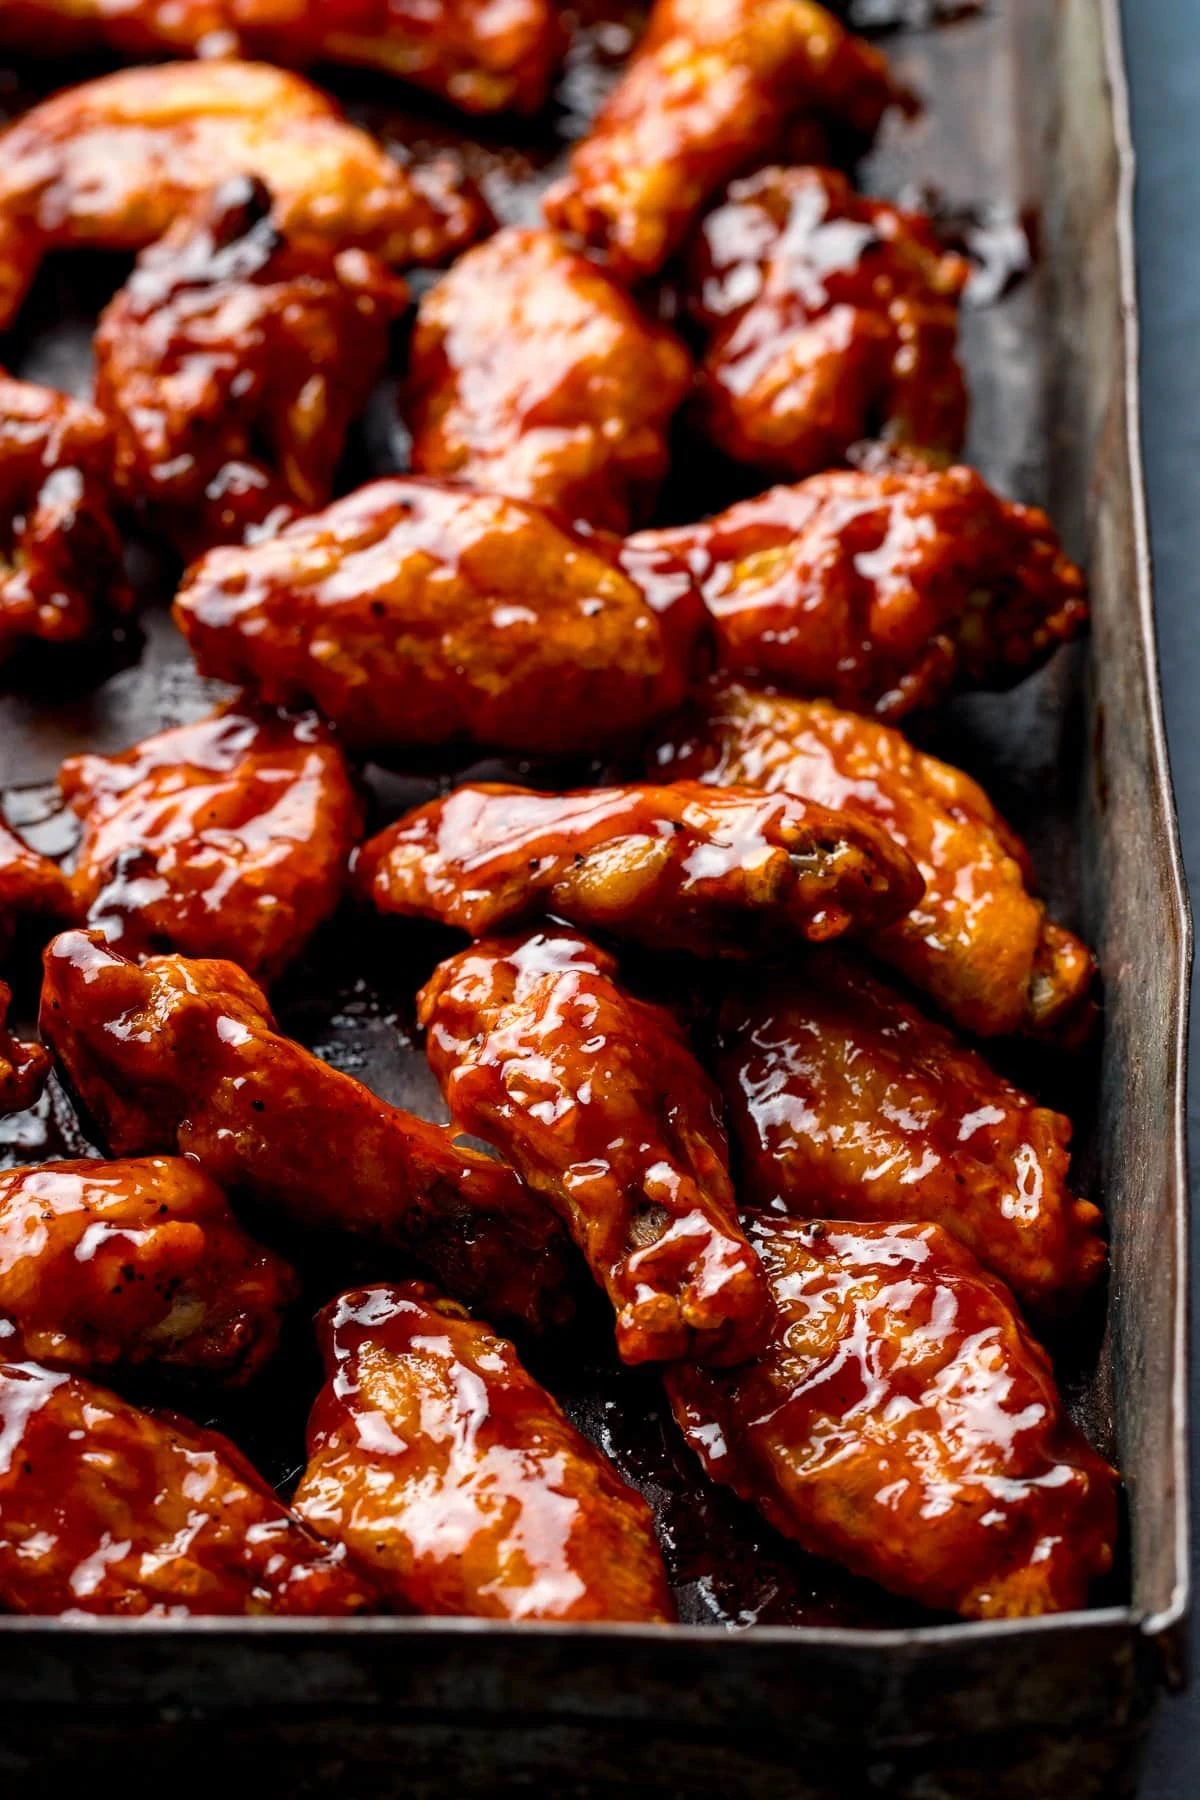 BBQ chicken wings on a baking tray